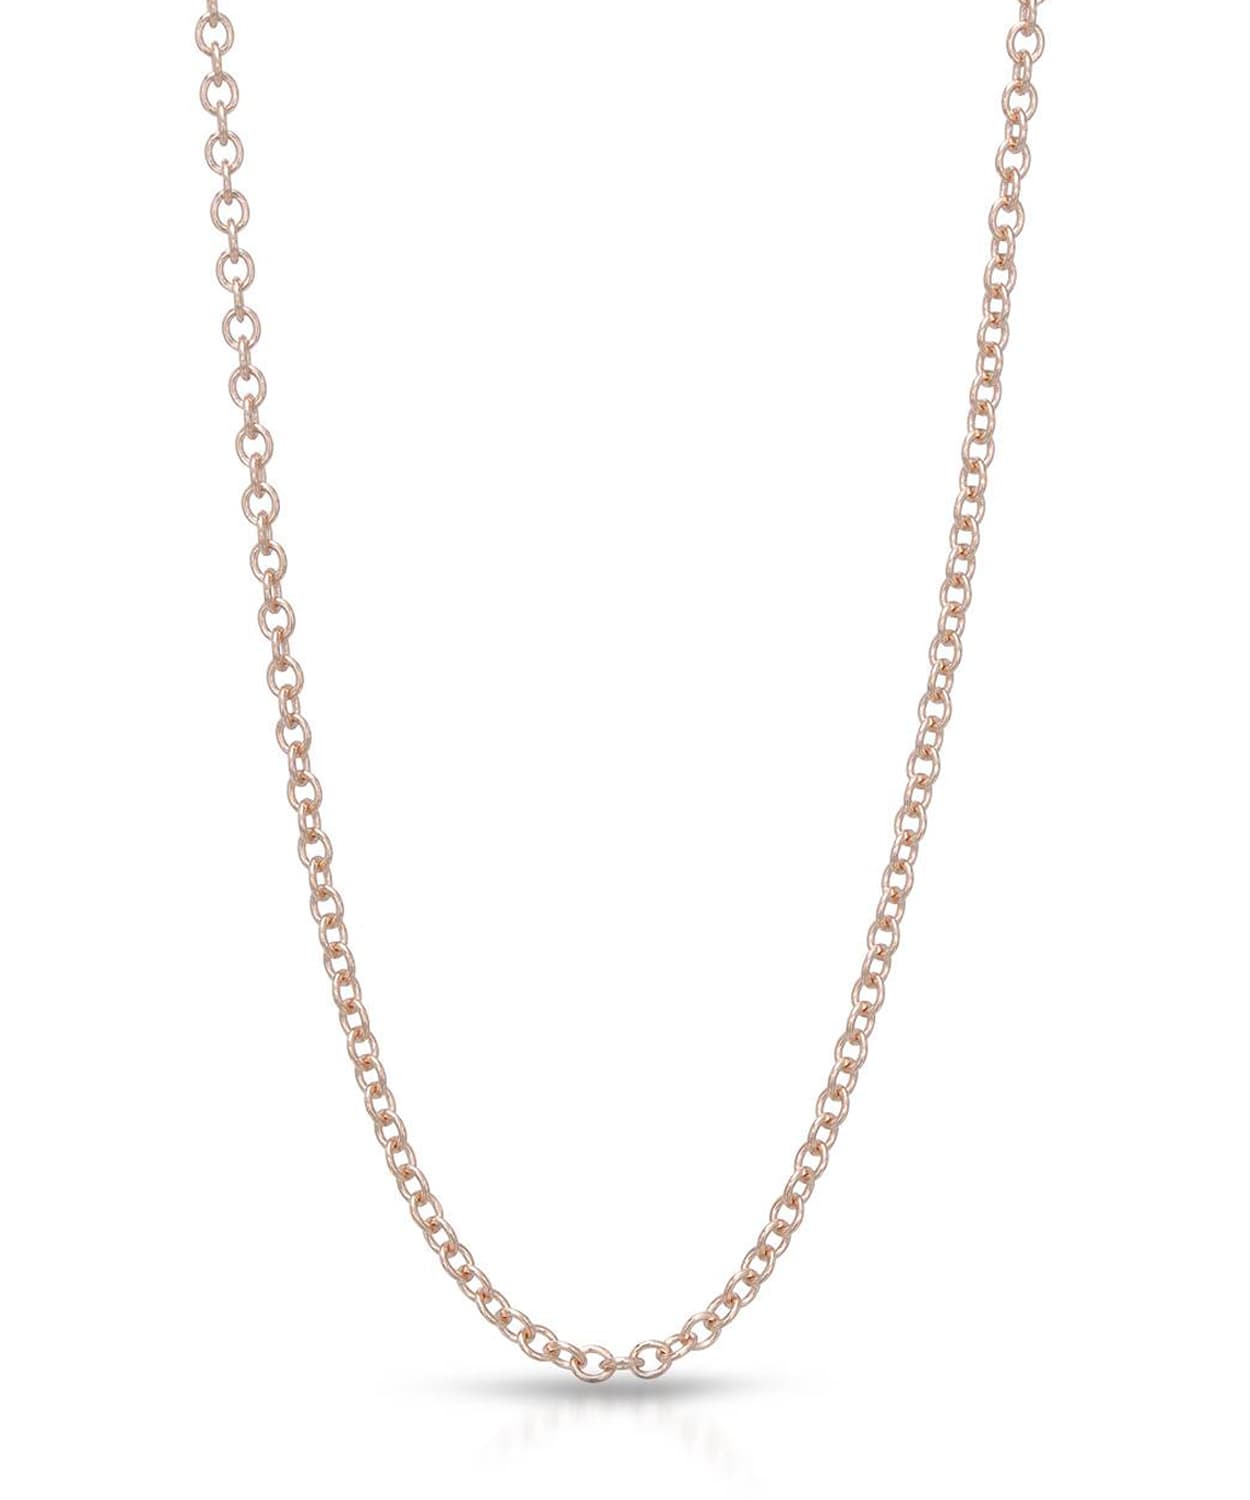 ESEMCO 1.6mm 14K Rose Gold Rolo Chain View 1